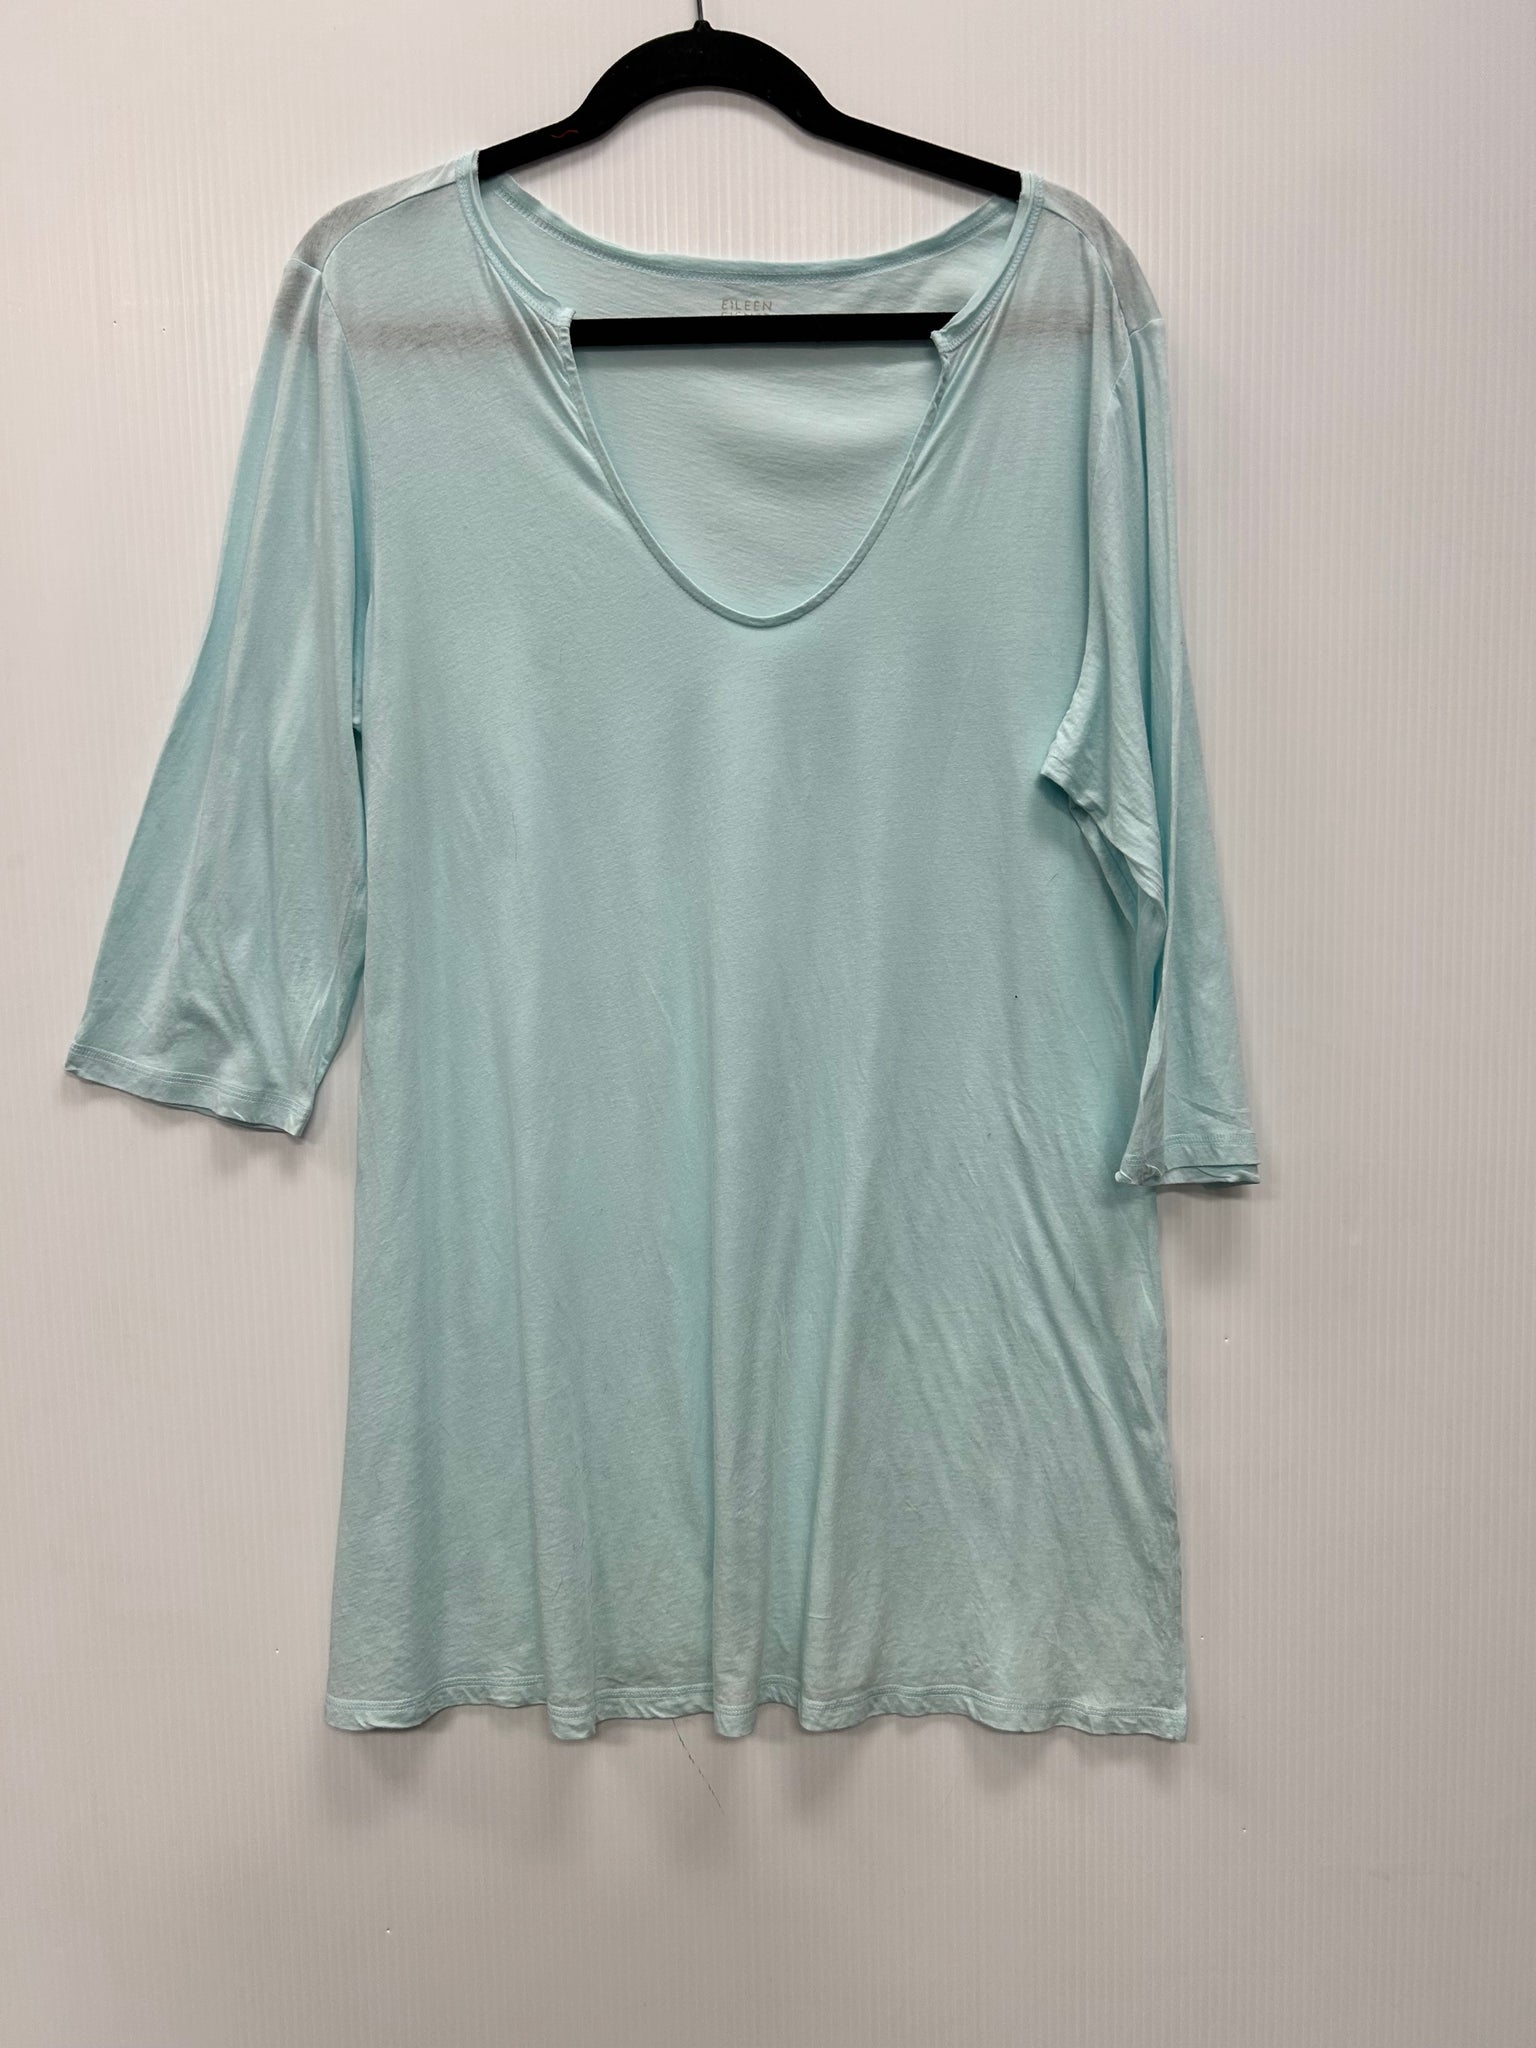 Size XL Eileen Fisher Top Item No. 21222